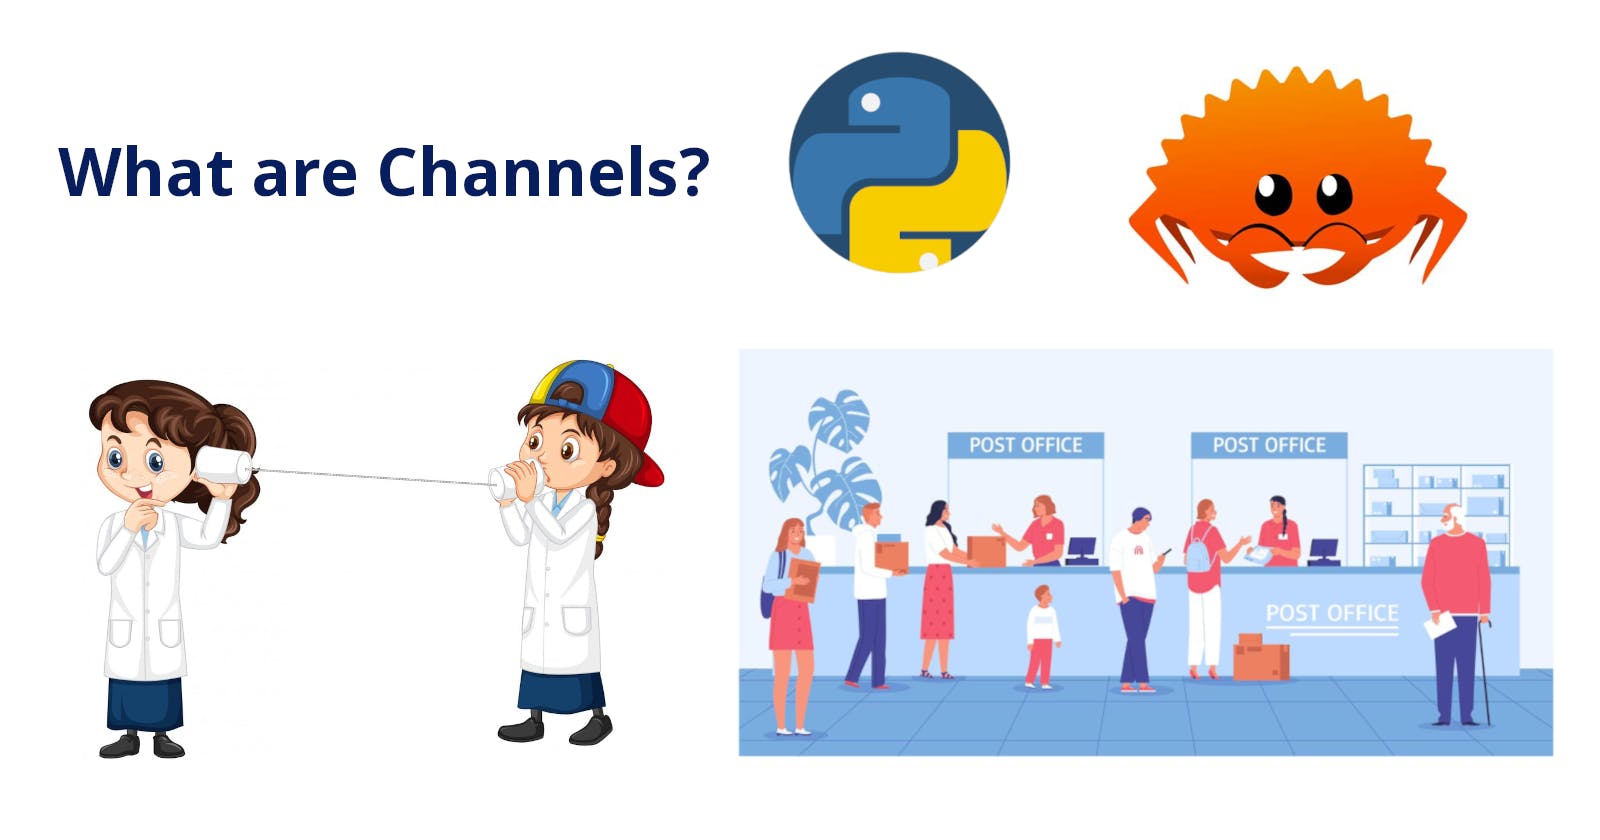 What are Channels?